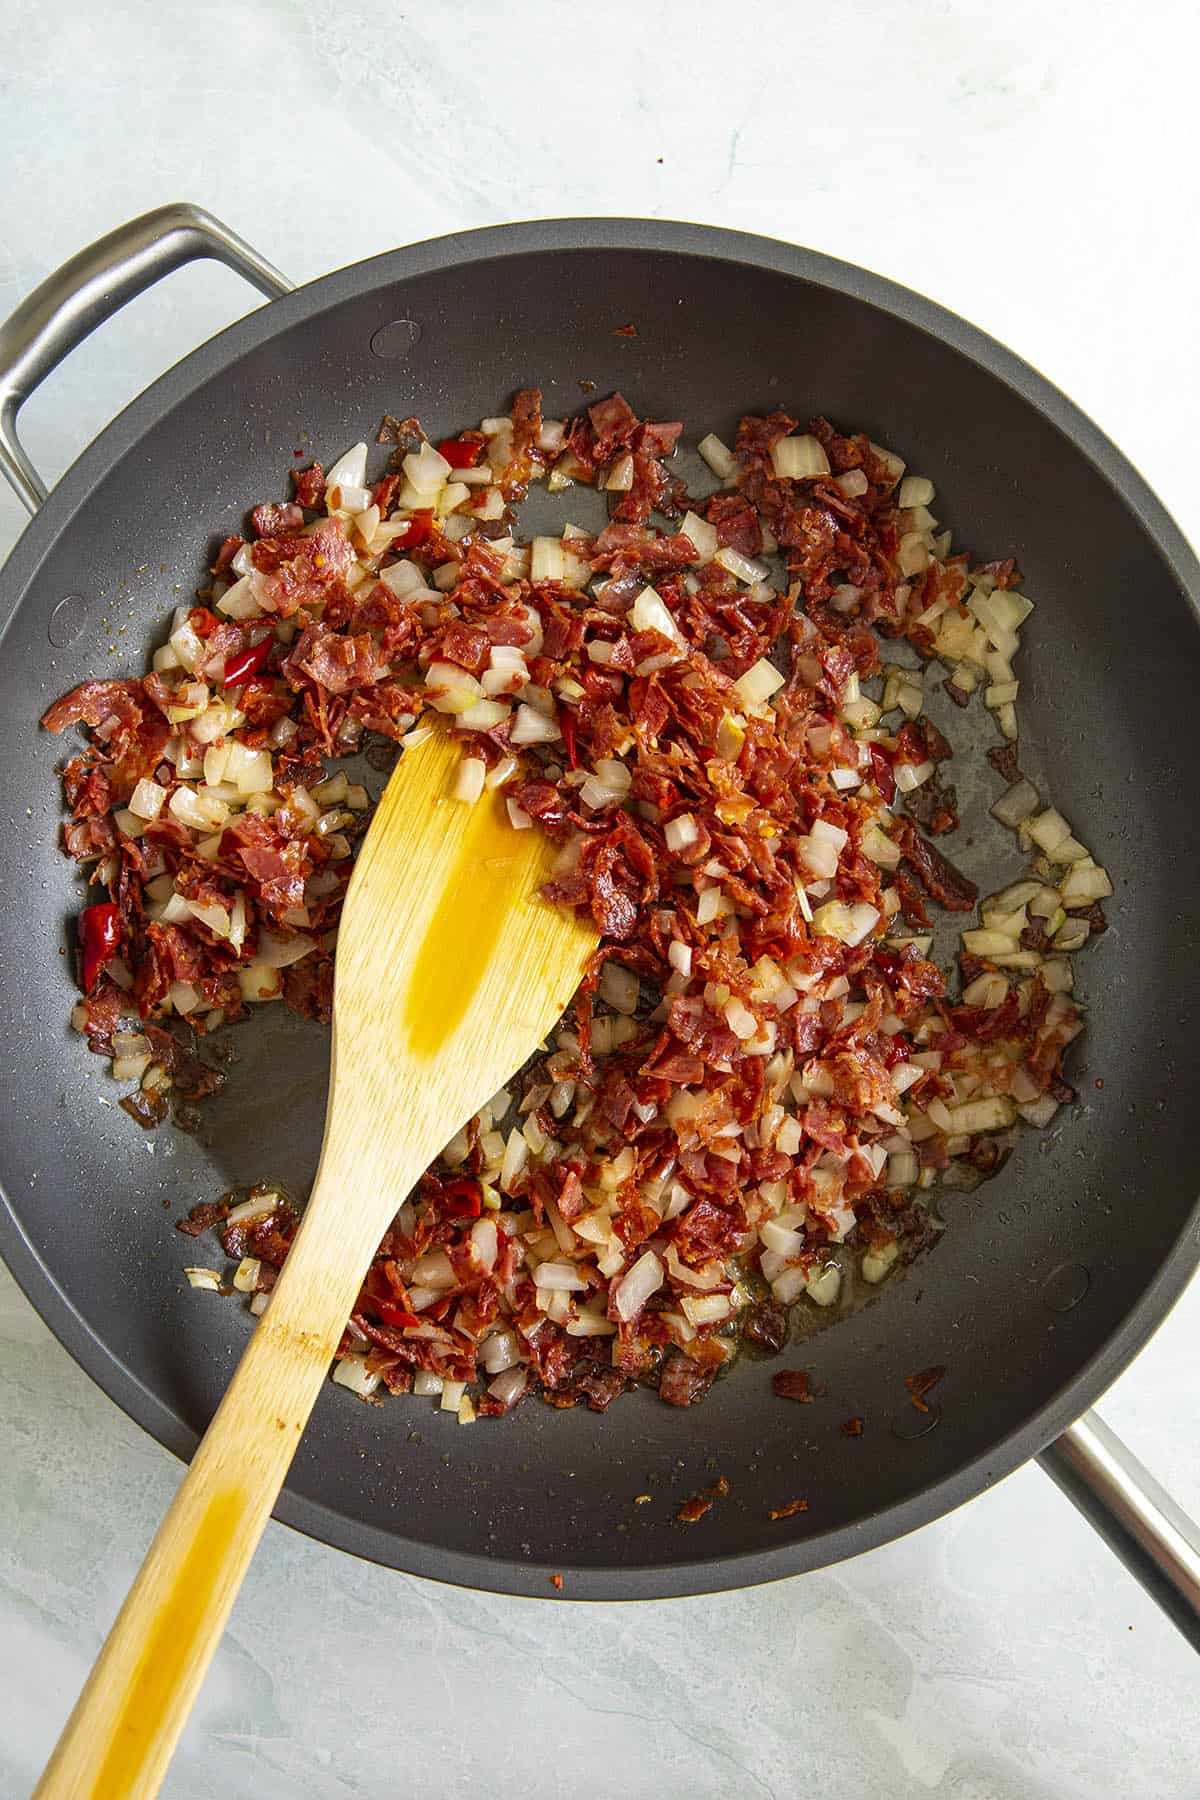 Cooking onions, peppers and guanciale to make Amatriciana sauce